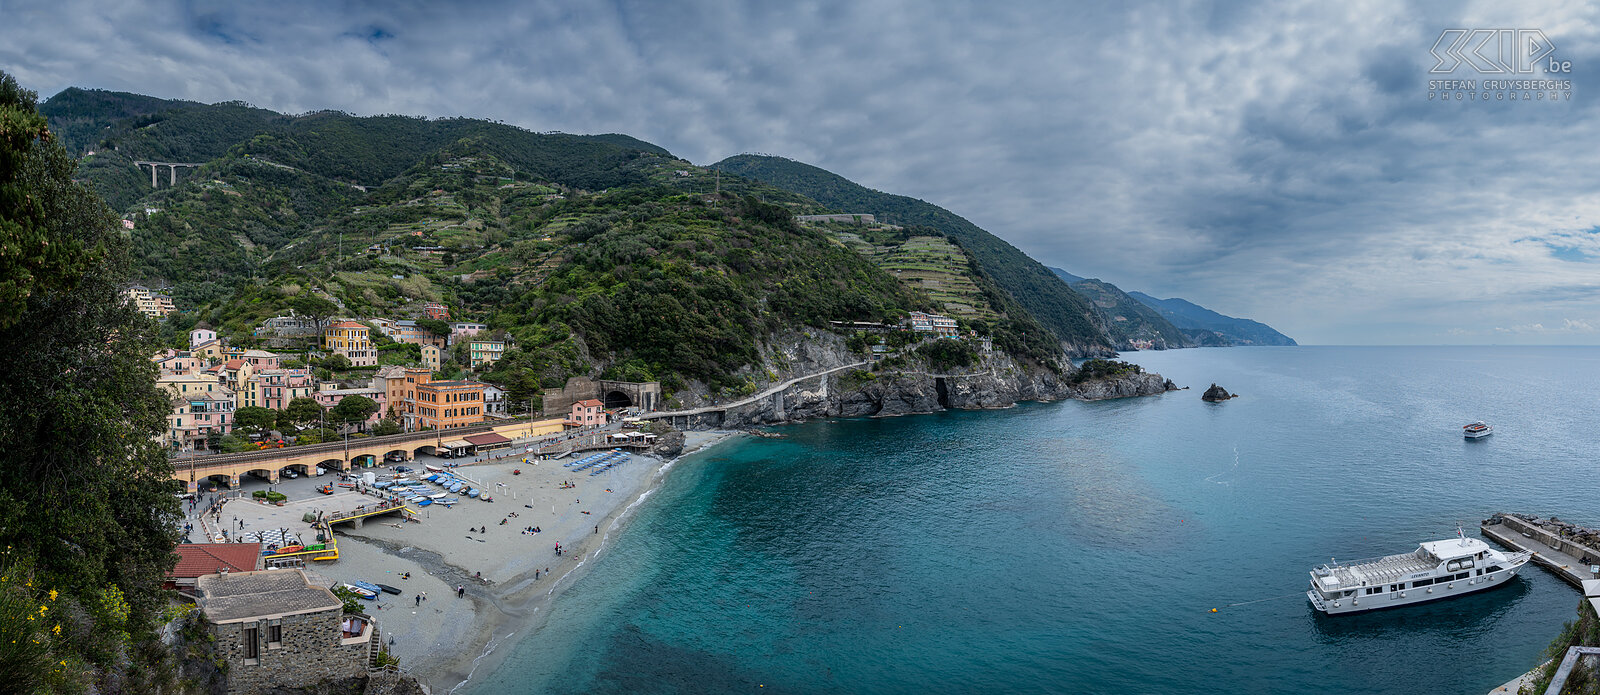 Monterosso al Mare Panorama view from Chiesa di San Francesco on top of the hill separating the old part of Monterosso from the new part.<br />
 Stefan Cruysberghs